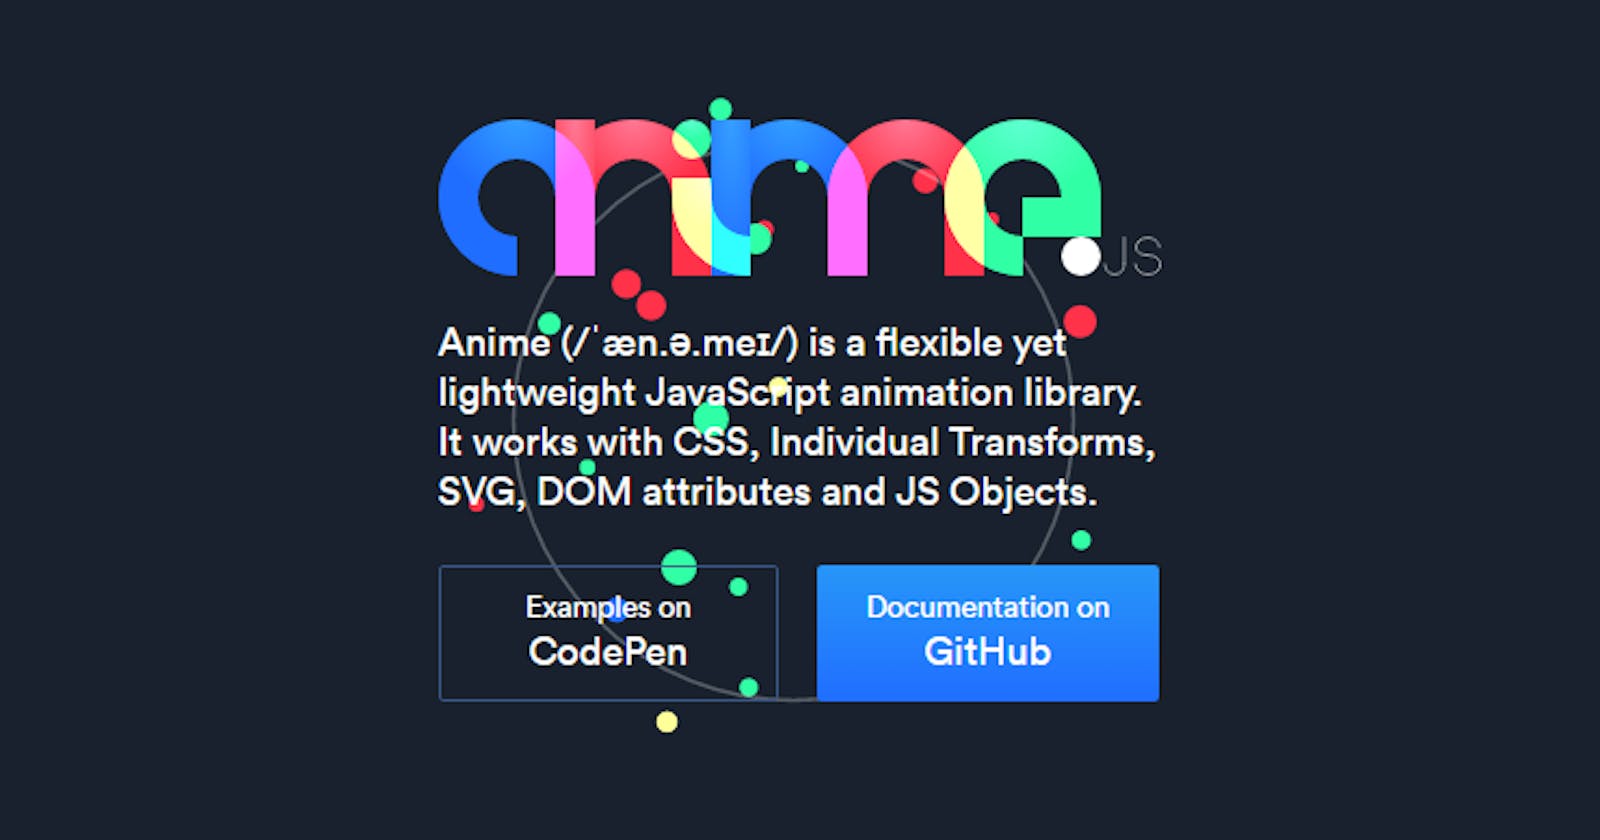 Creating an animation based on JavaScript using the Anime.js library